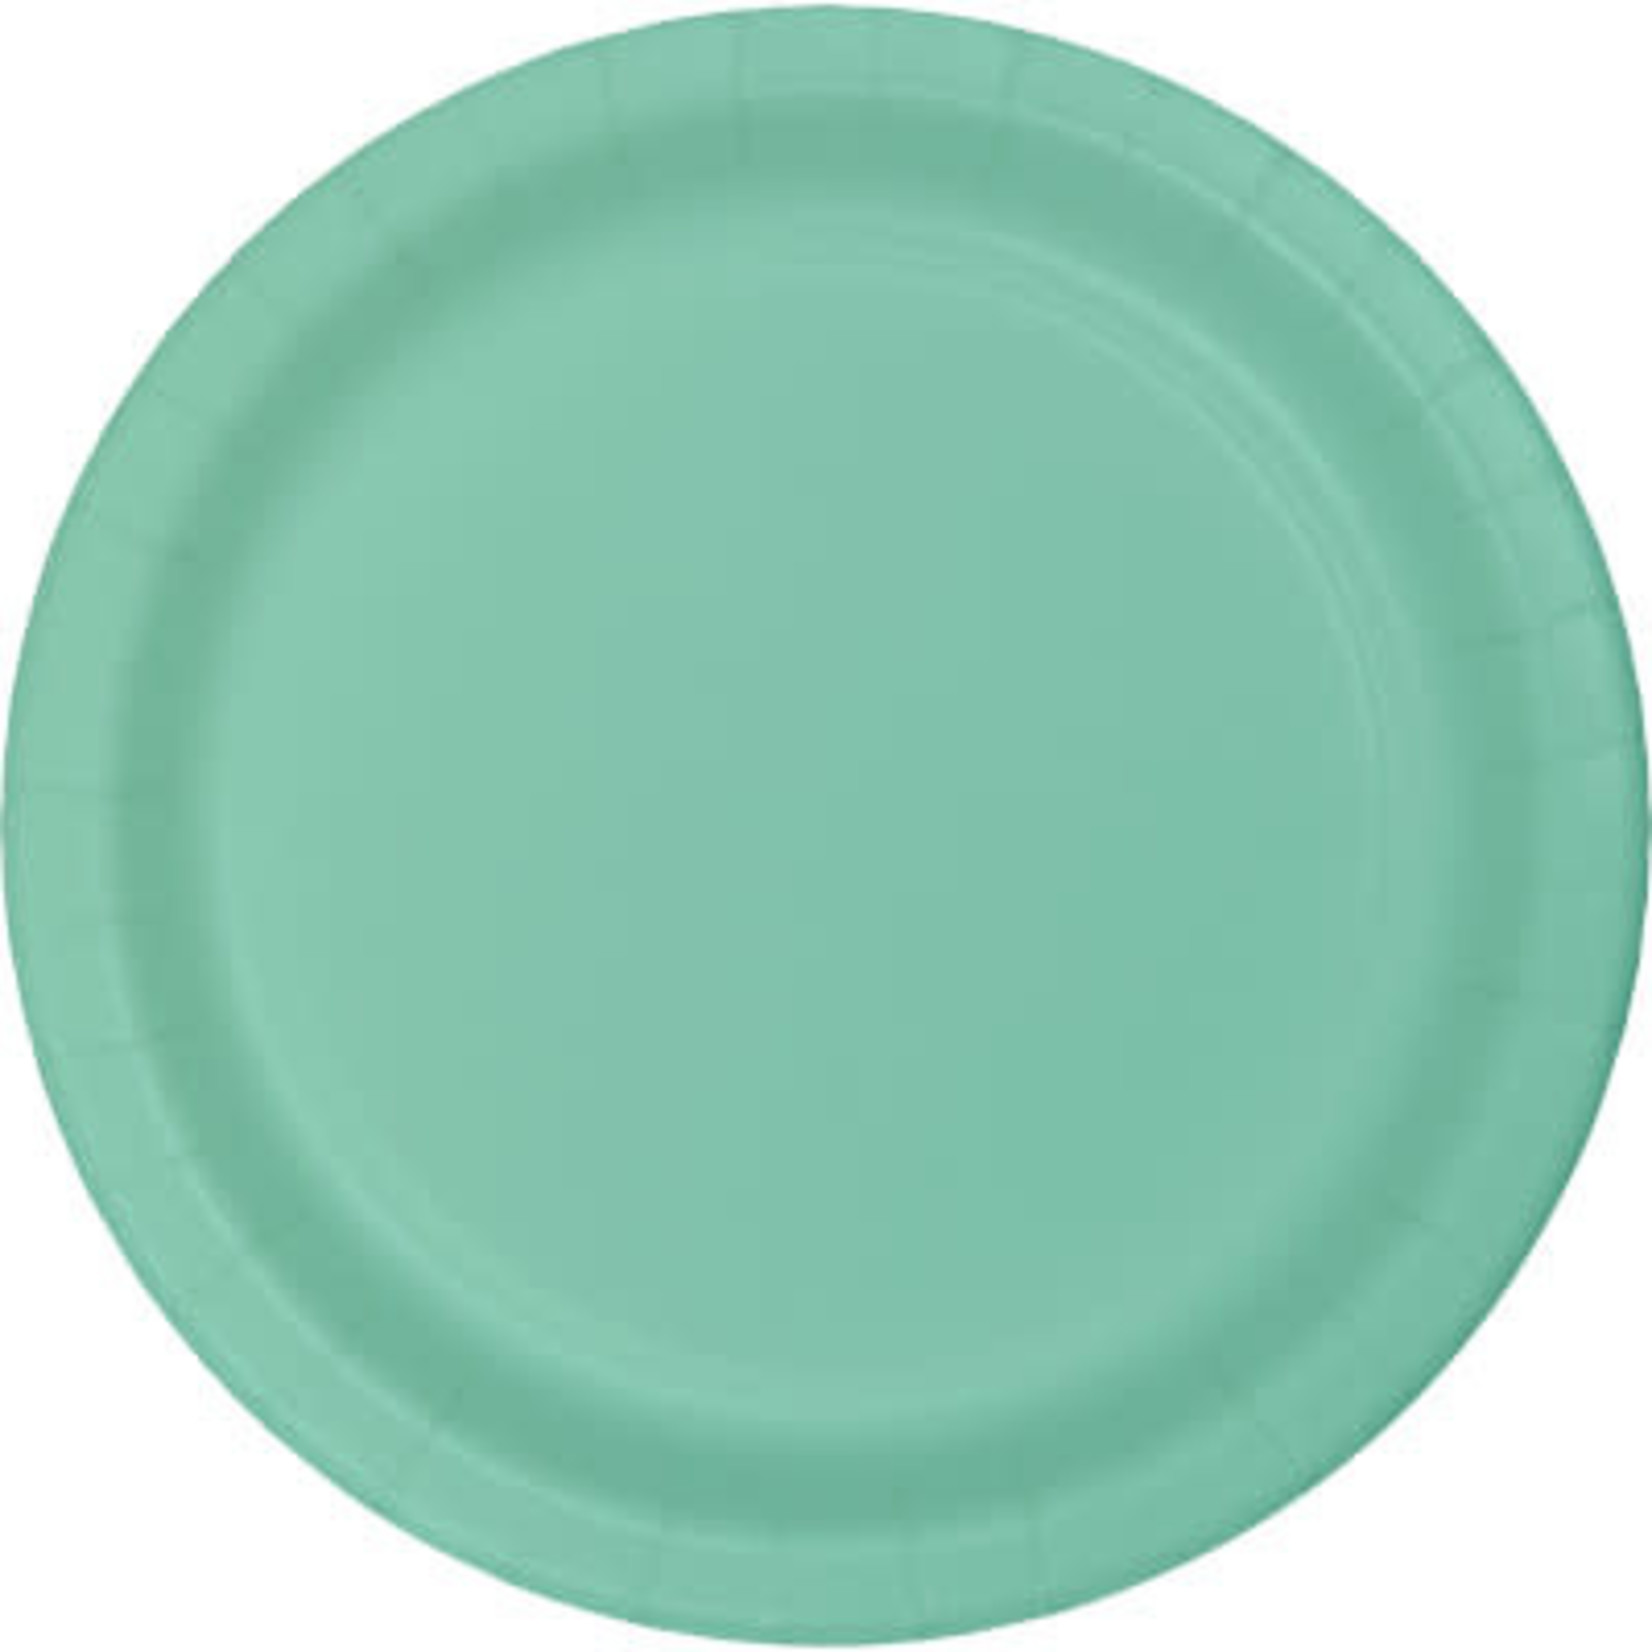 Touch of Color 7" Mint Green Paper Plates - 24ct.